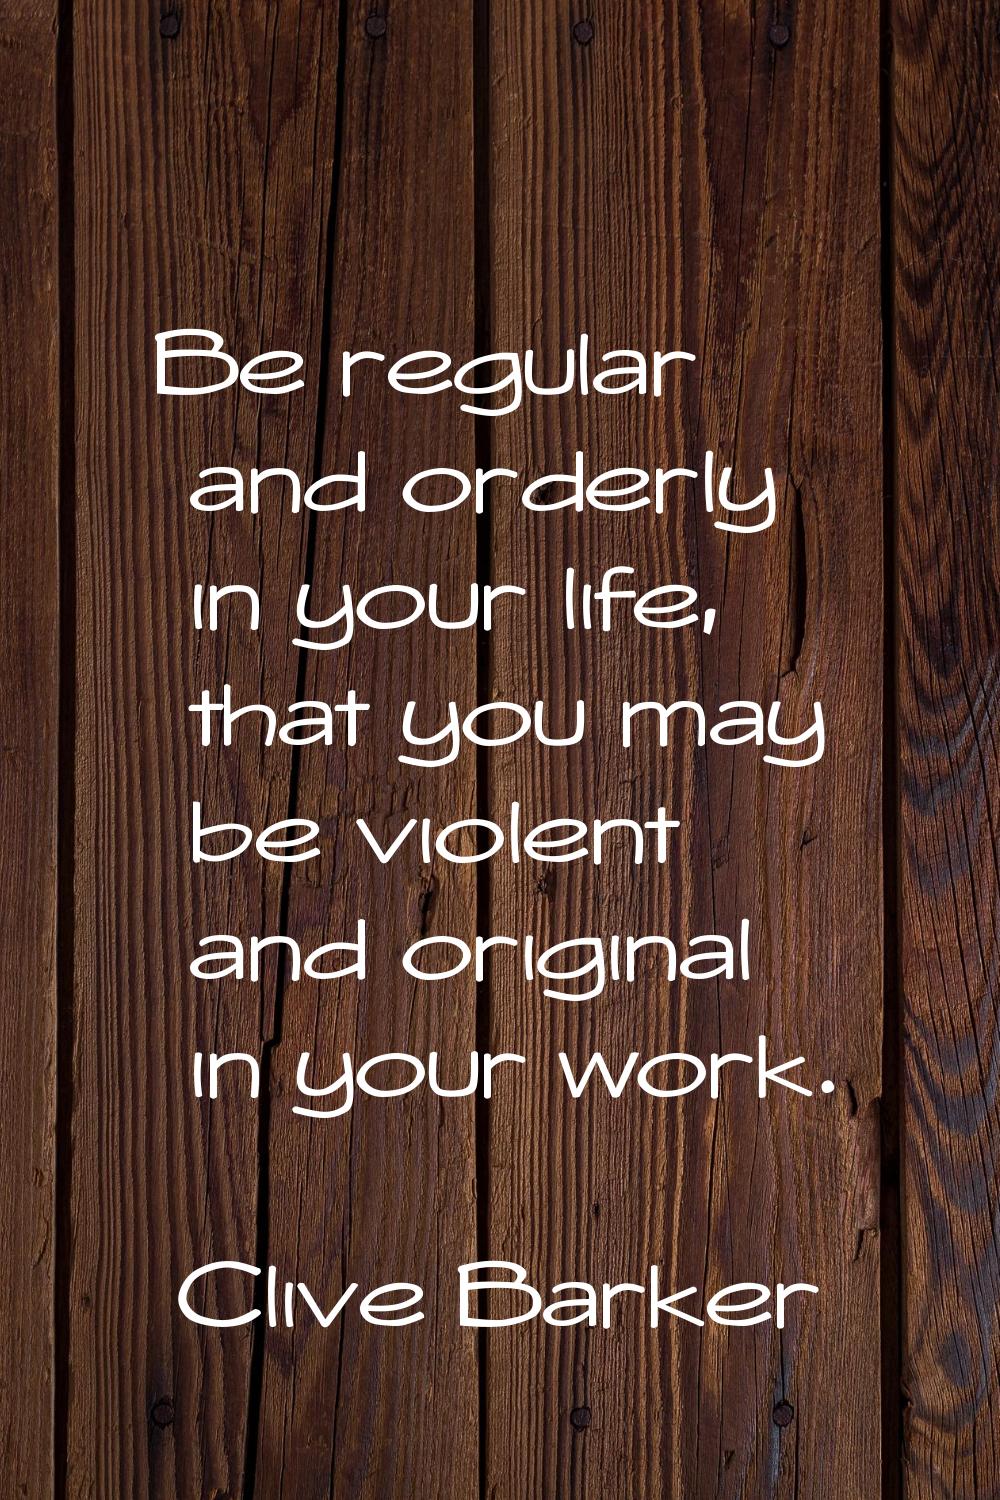 Be regular and orderly in your life, that you may be violent and original in your work.